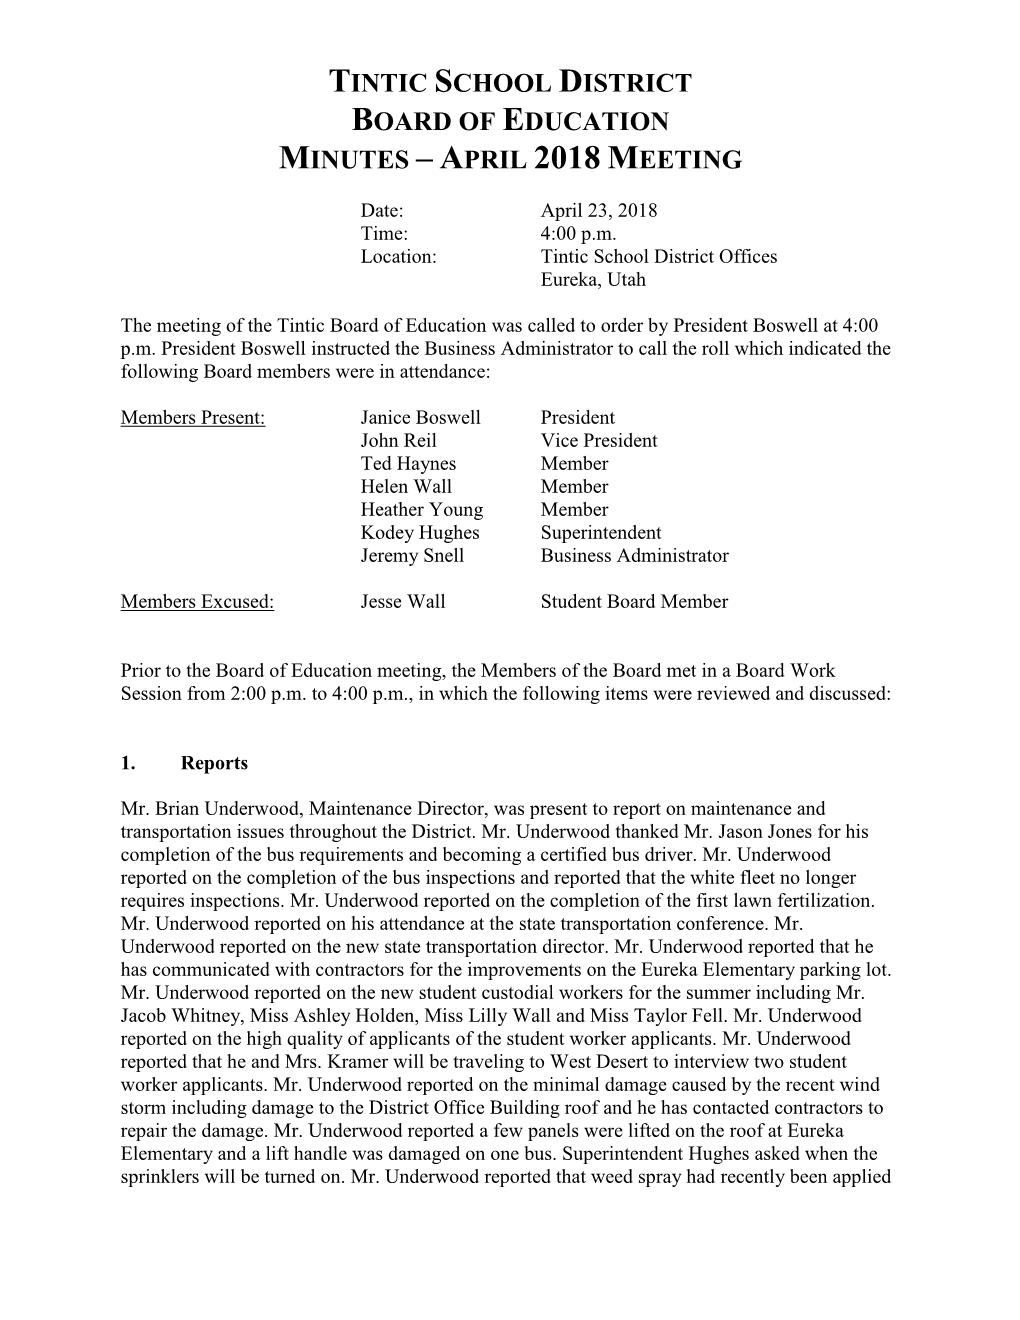 Tintic School District Board of Education Minutes – April 2018 Meeting